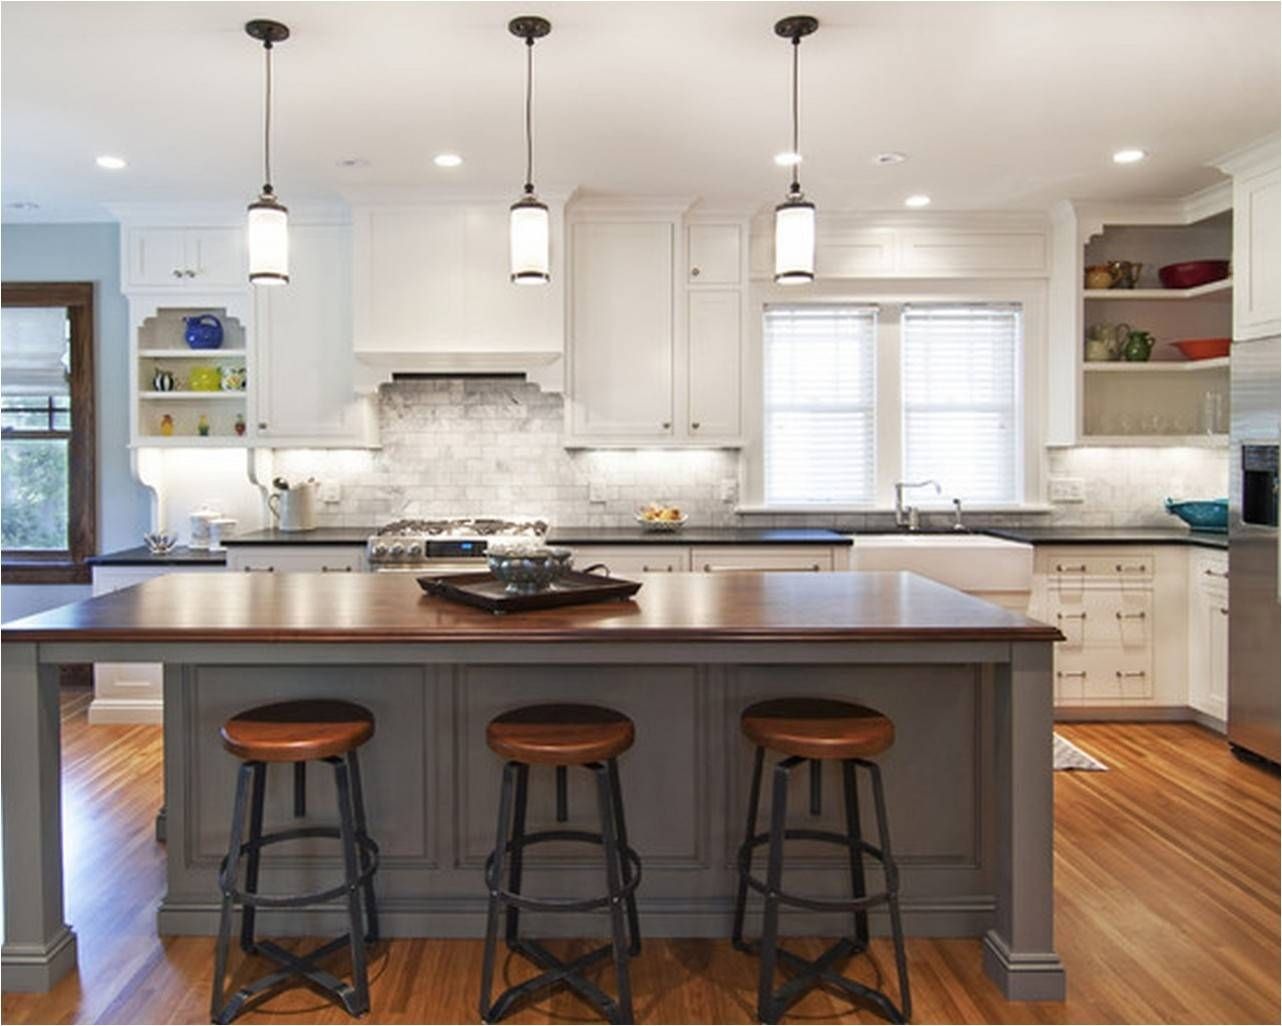 Cozy And Inviting Kitchen Island Lighting | Lighting Designs Ideas In Pendants For Kitchen Island (View 9 of 15)